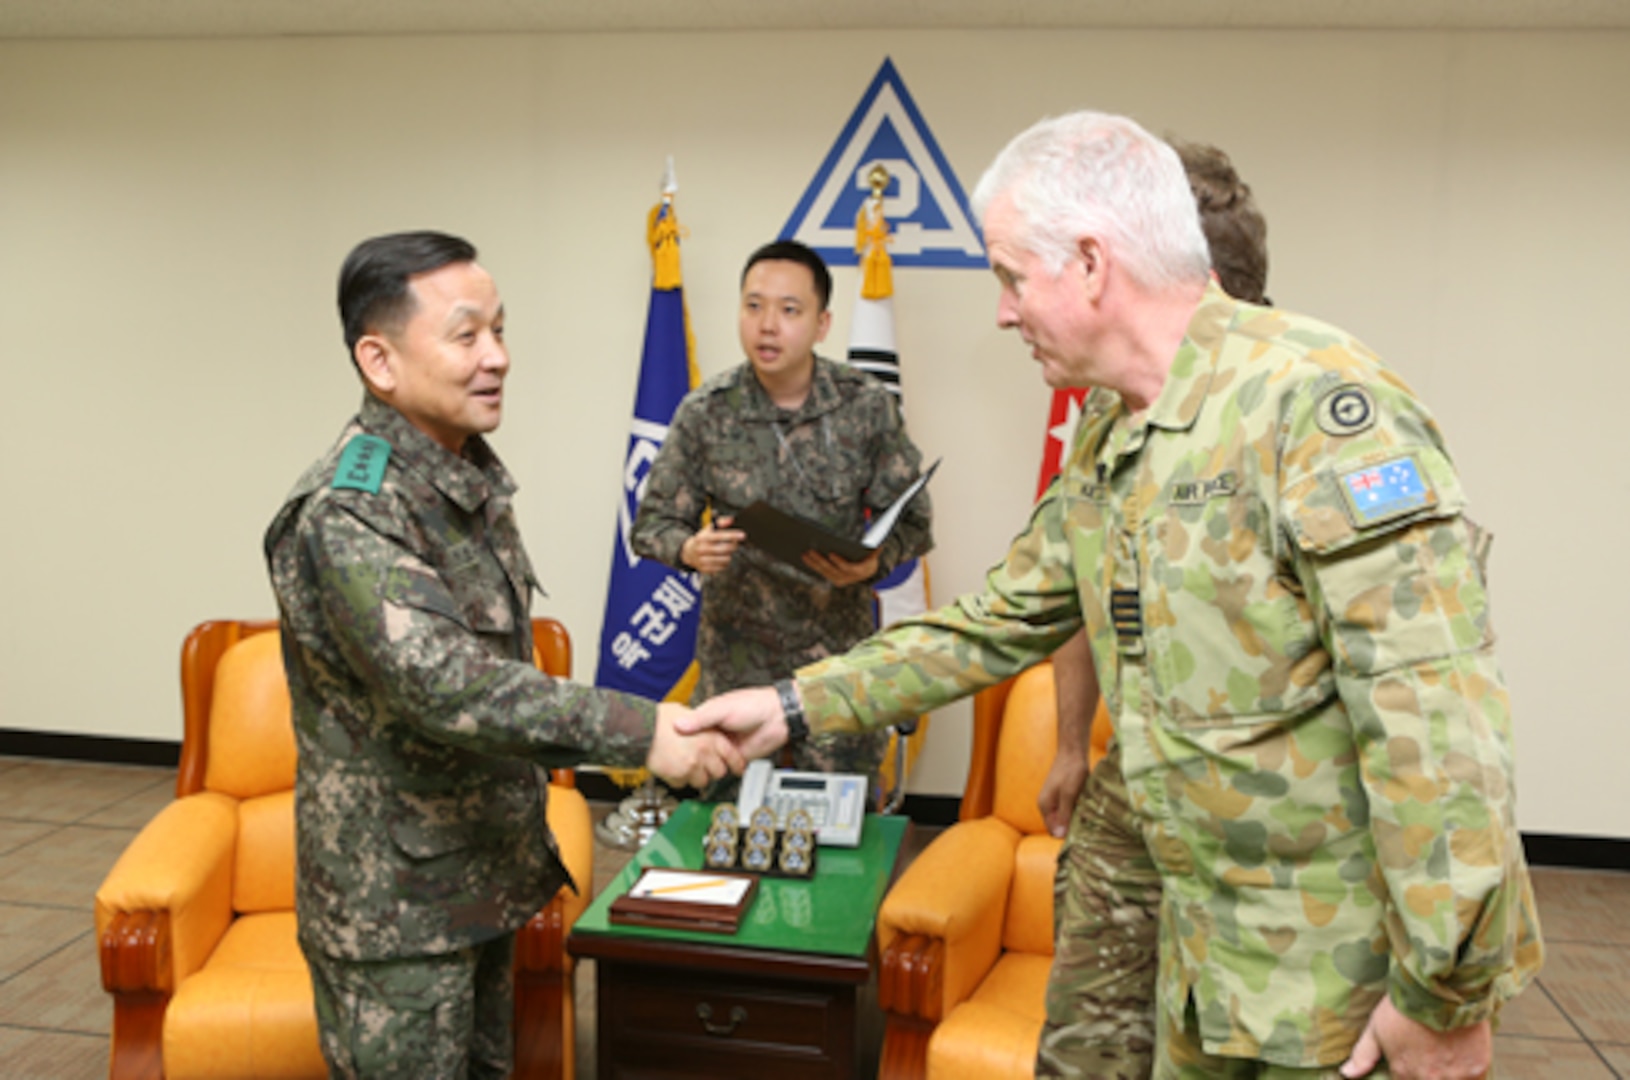 Gen. Soon Jin Lee, commander of Republic of Korea Army 2nd Operational Command, greets Australian Air Force Capt. Ralph Kettle, deputy director of Multi-National Coordination Center, during an office call at the 2OC Headquarters in Daegu, Republic of Korea March 4 as part of the annual Key Resolve Exercise. This exercise includes multi-national forces that contribute to readiness as United Nations Command “Sending States”. The Sending States are comprised of the 16 nations that provided combat, combat support, or combat service support during the Korean War and were present during the signing of the Armistice Agreement. Their contributions are coordinated through the MNCC. 